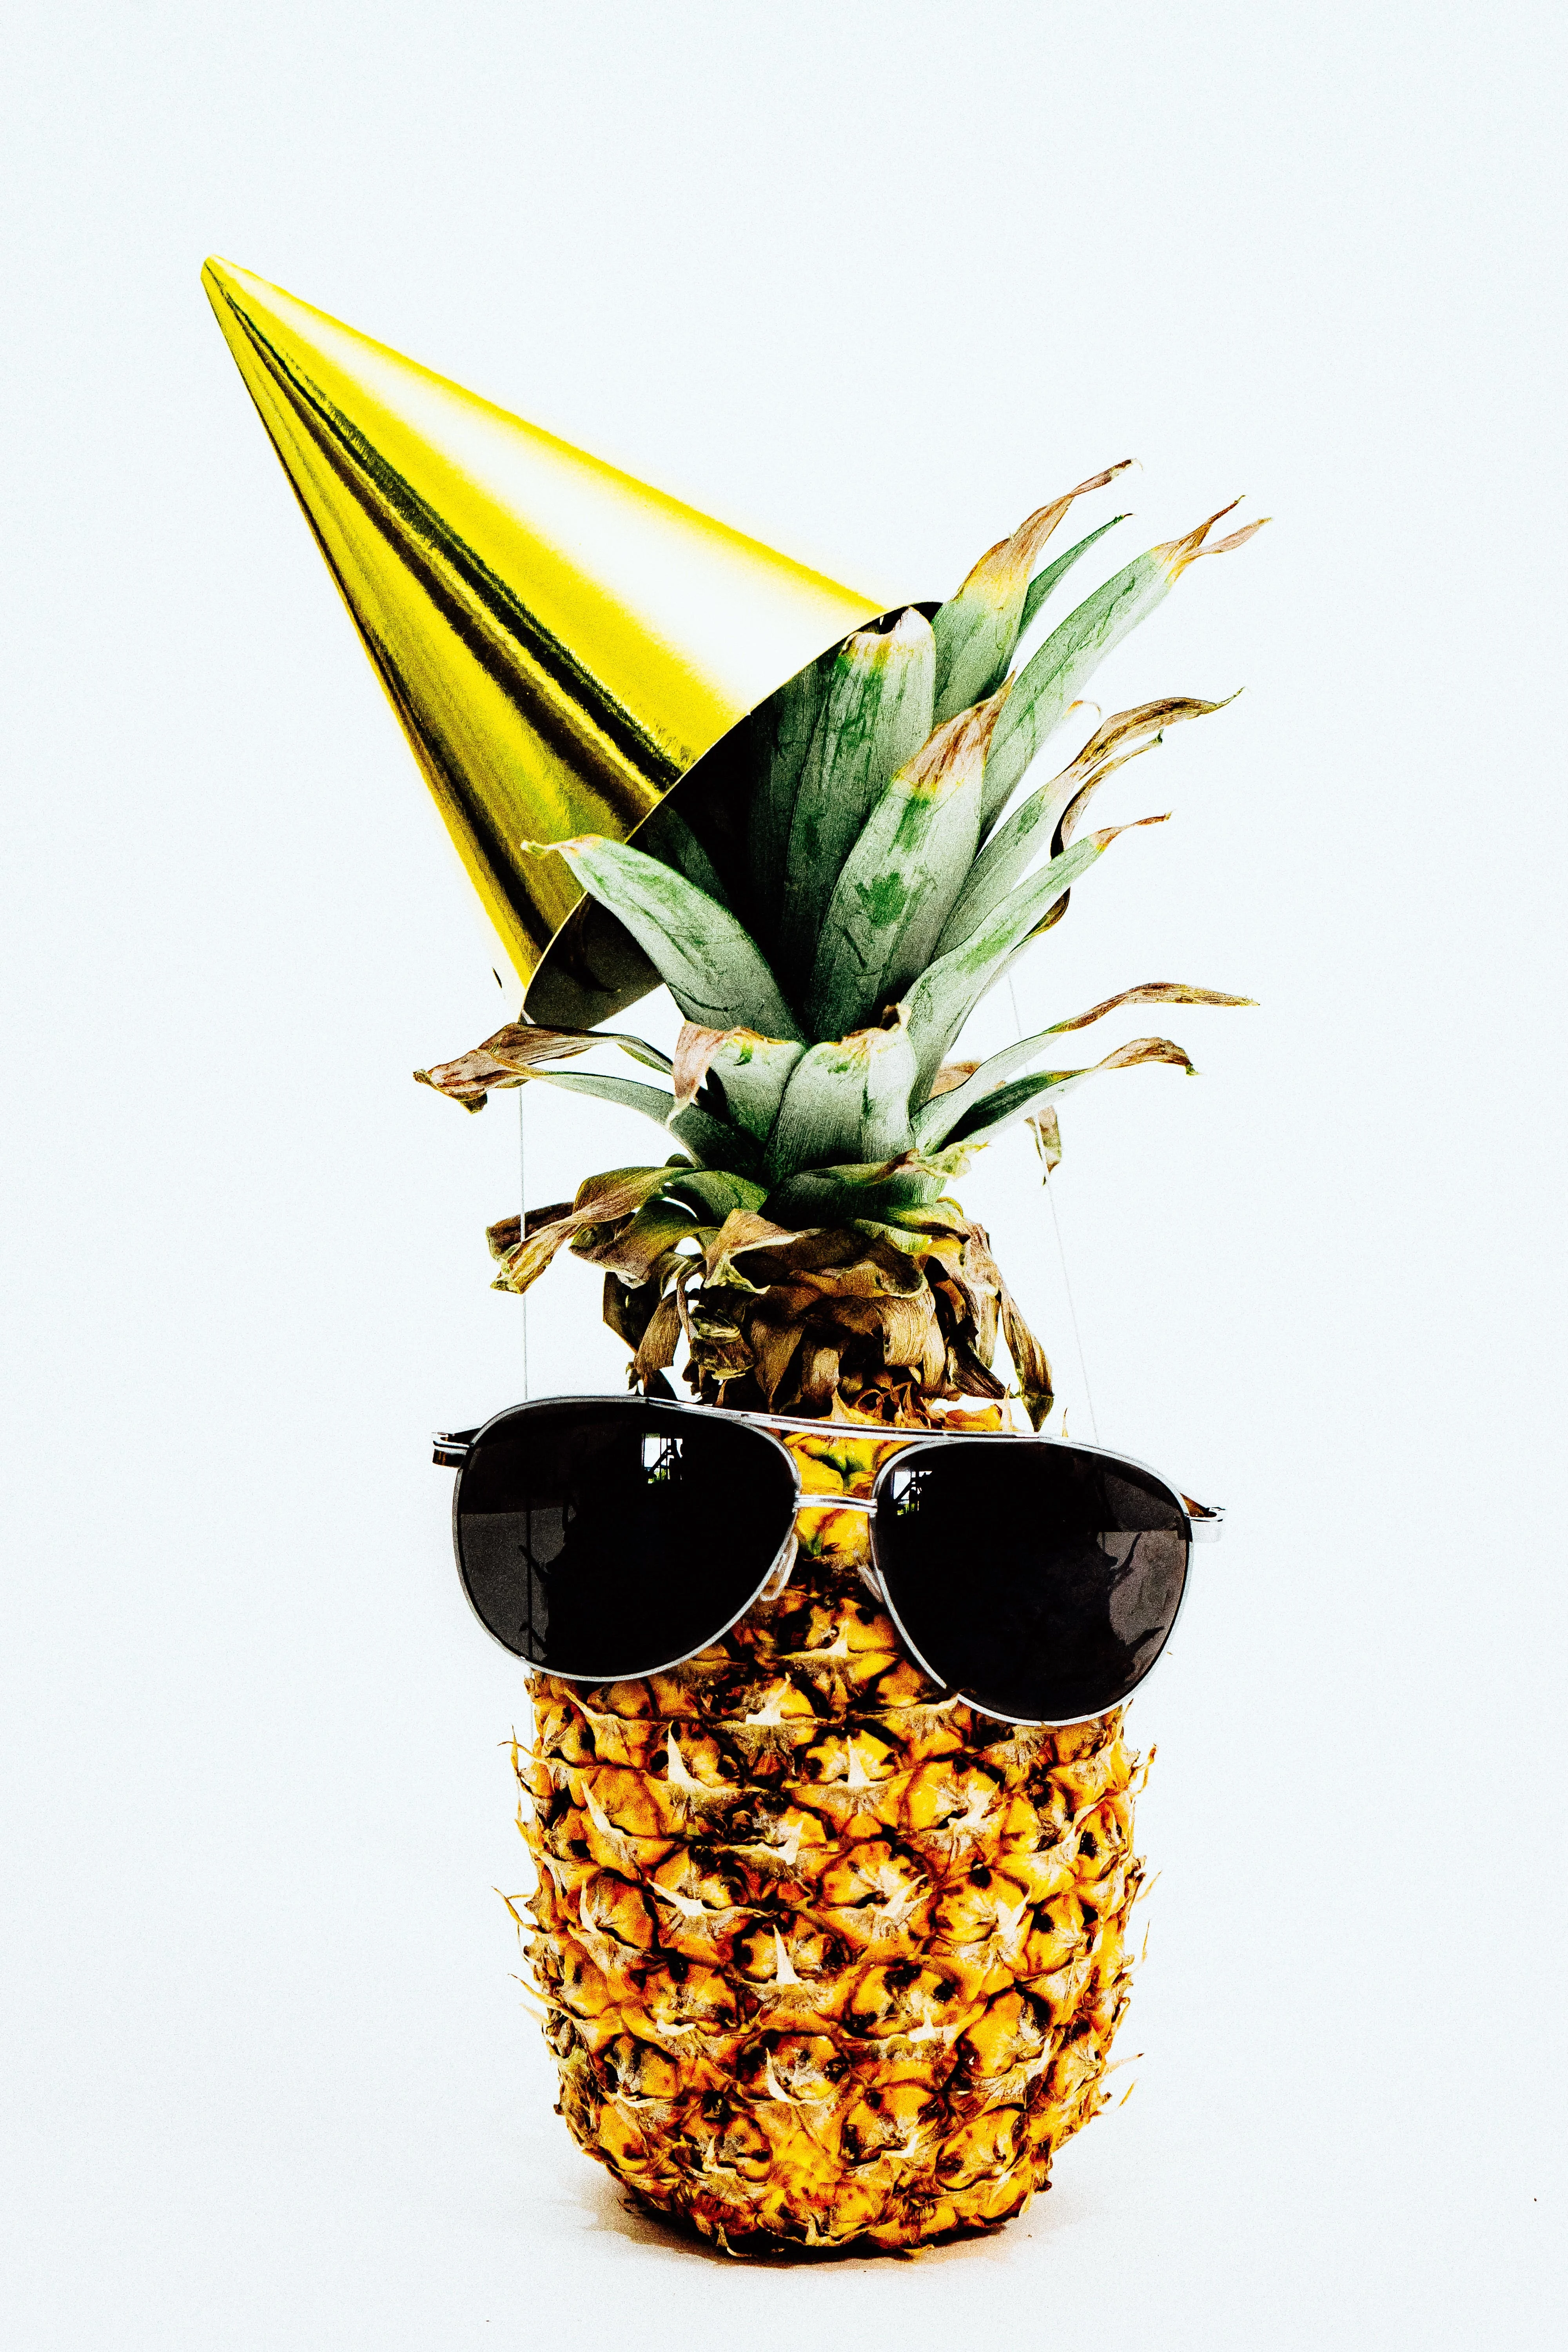 Free Close-up Photo of Pineapple with Party Hat and a Black Sunglasses Stock Photo